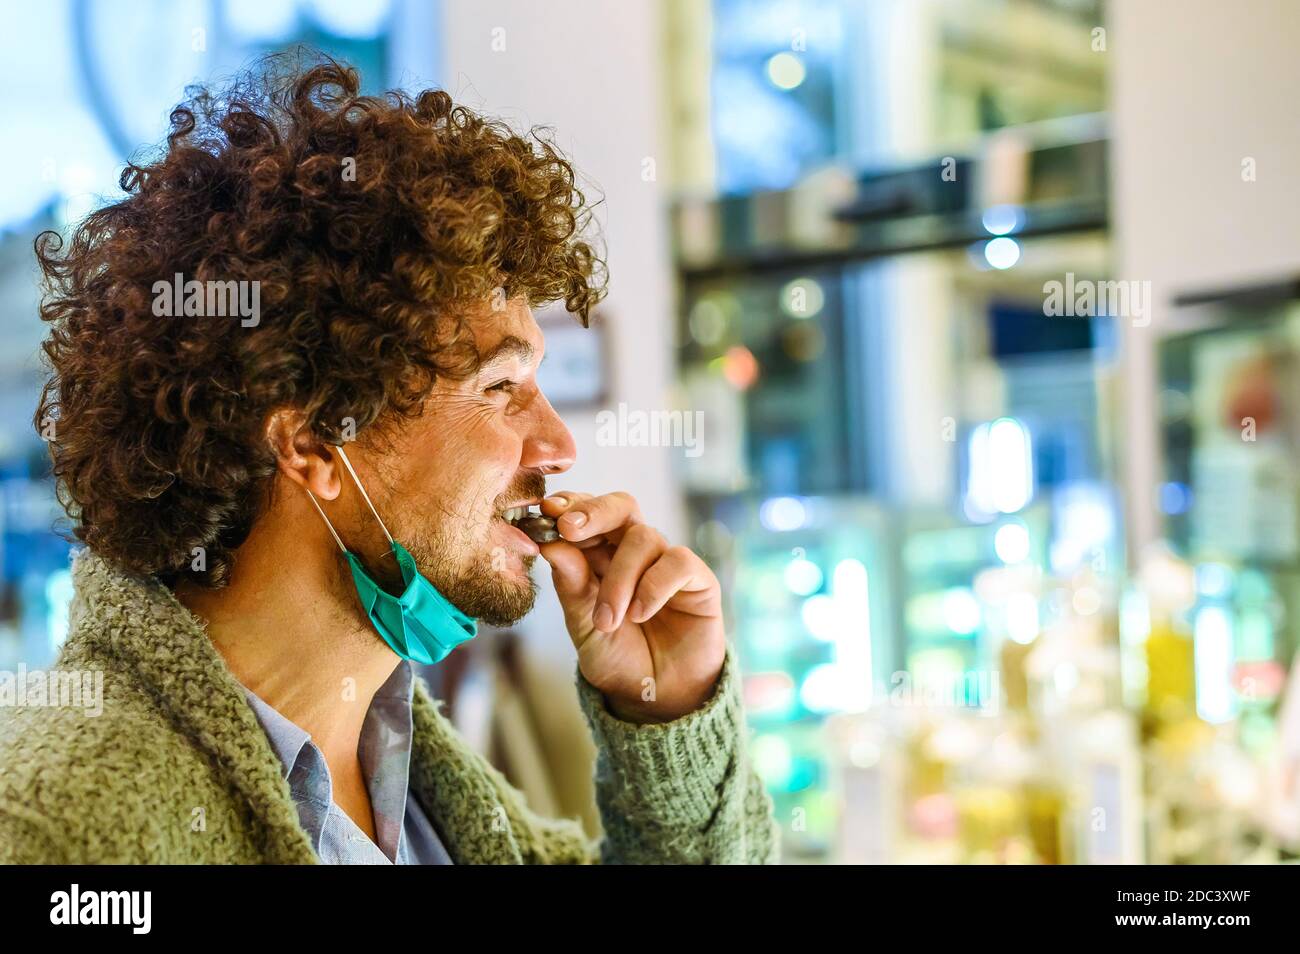 Young Happy Bearded Man With Healthy Skin And Curly Hair Pleasured With Taste Of Organic Freshly Baked Chocolate Holds One Small Piece In One Hand Stock Photo Alamy